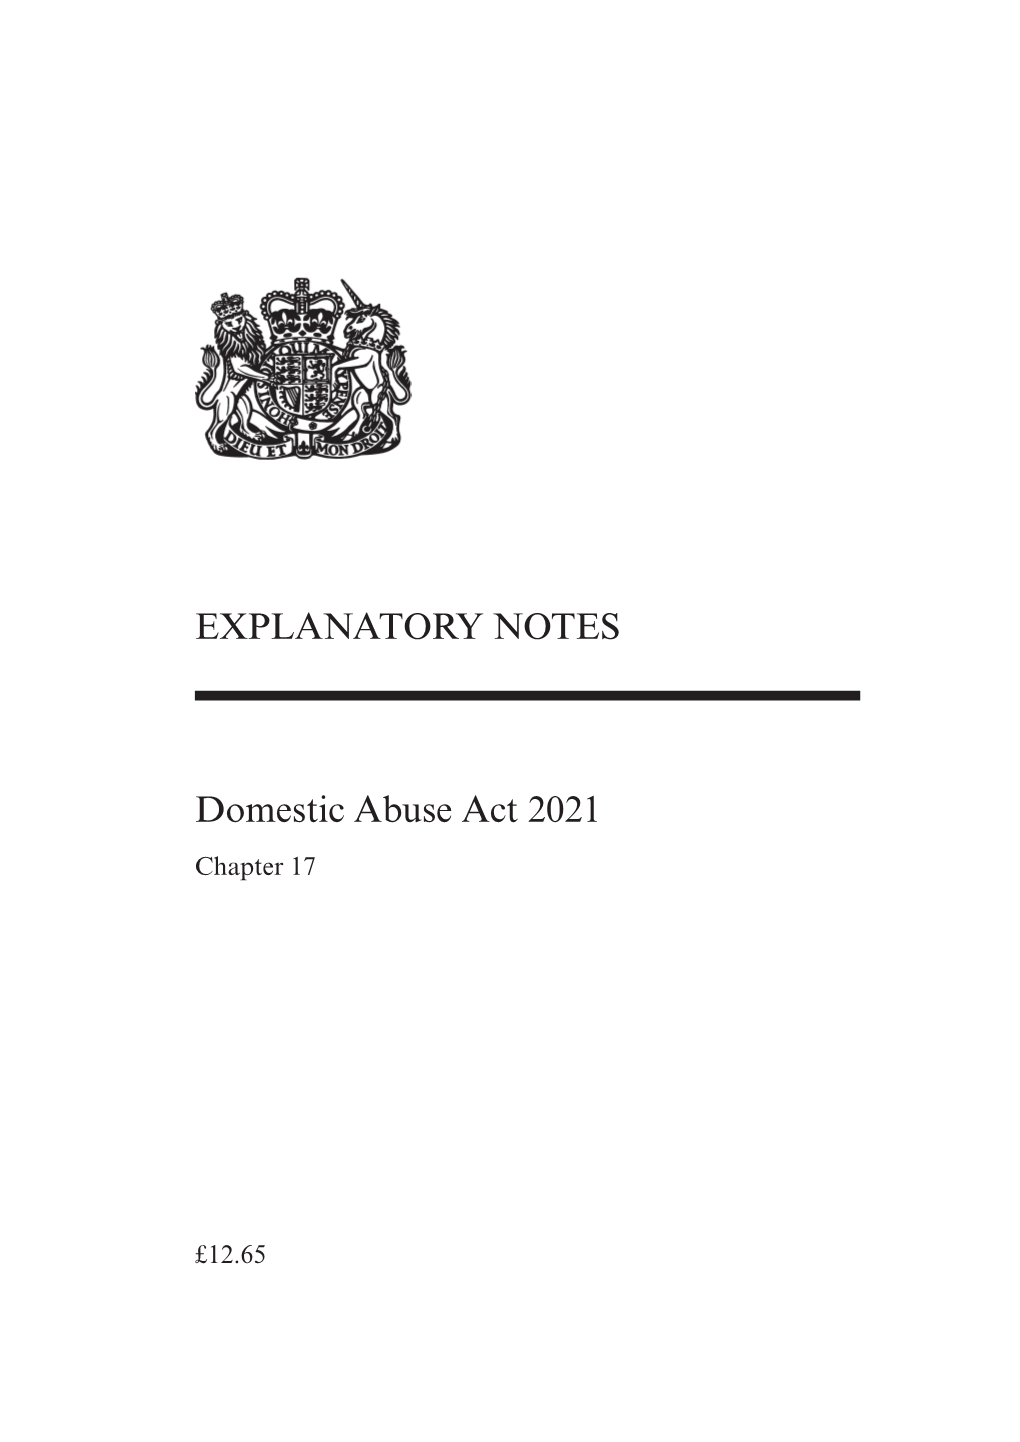 EXPLANATORY NOTES Domestic Abuse Act 2021